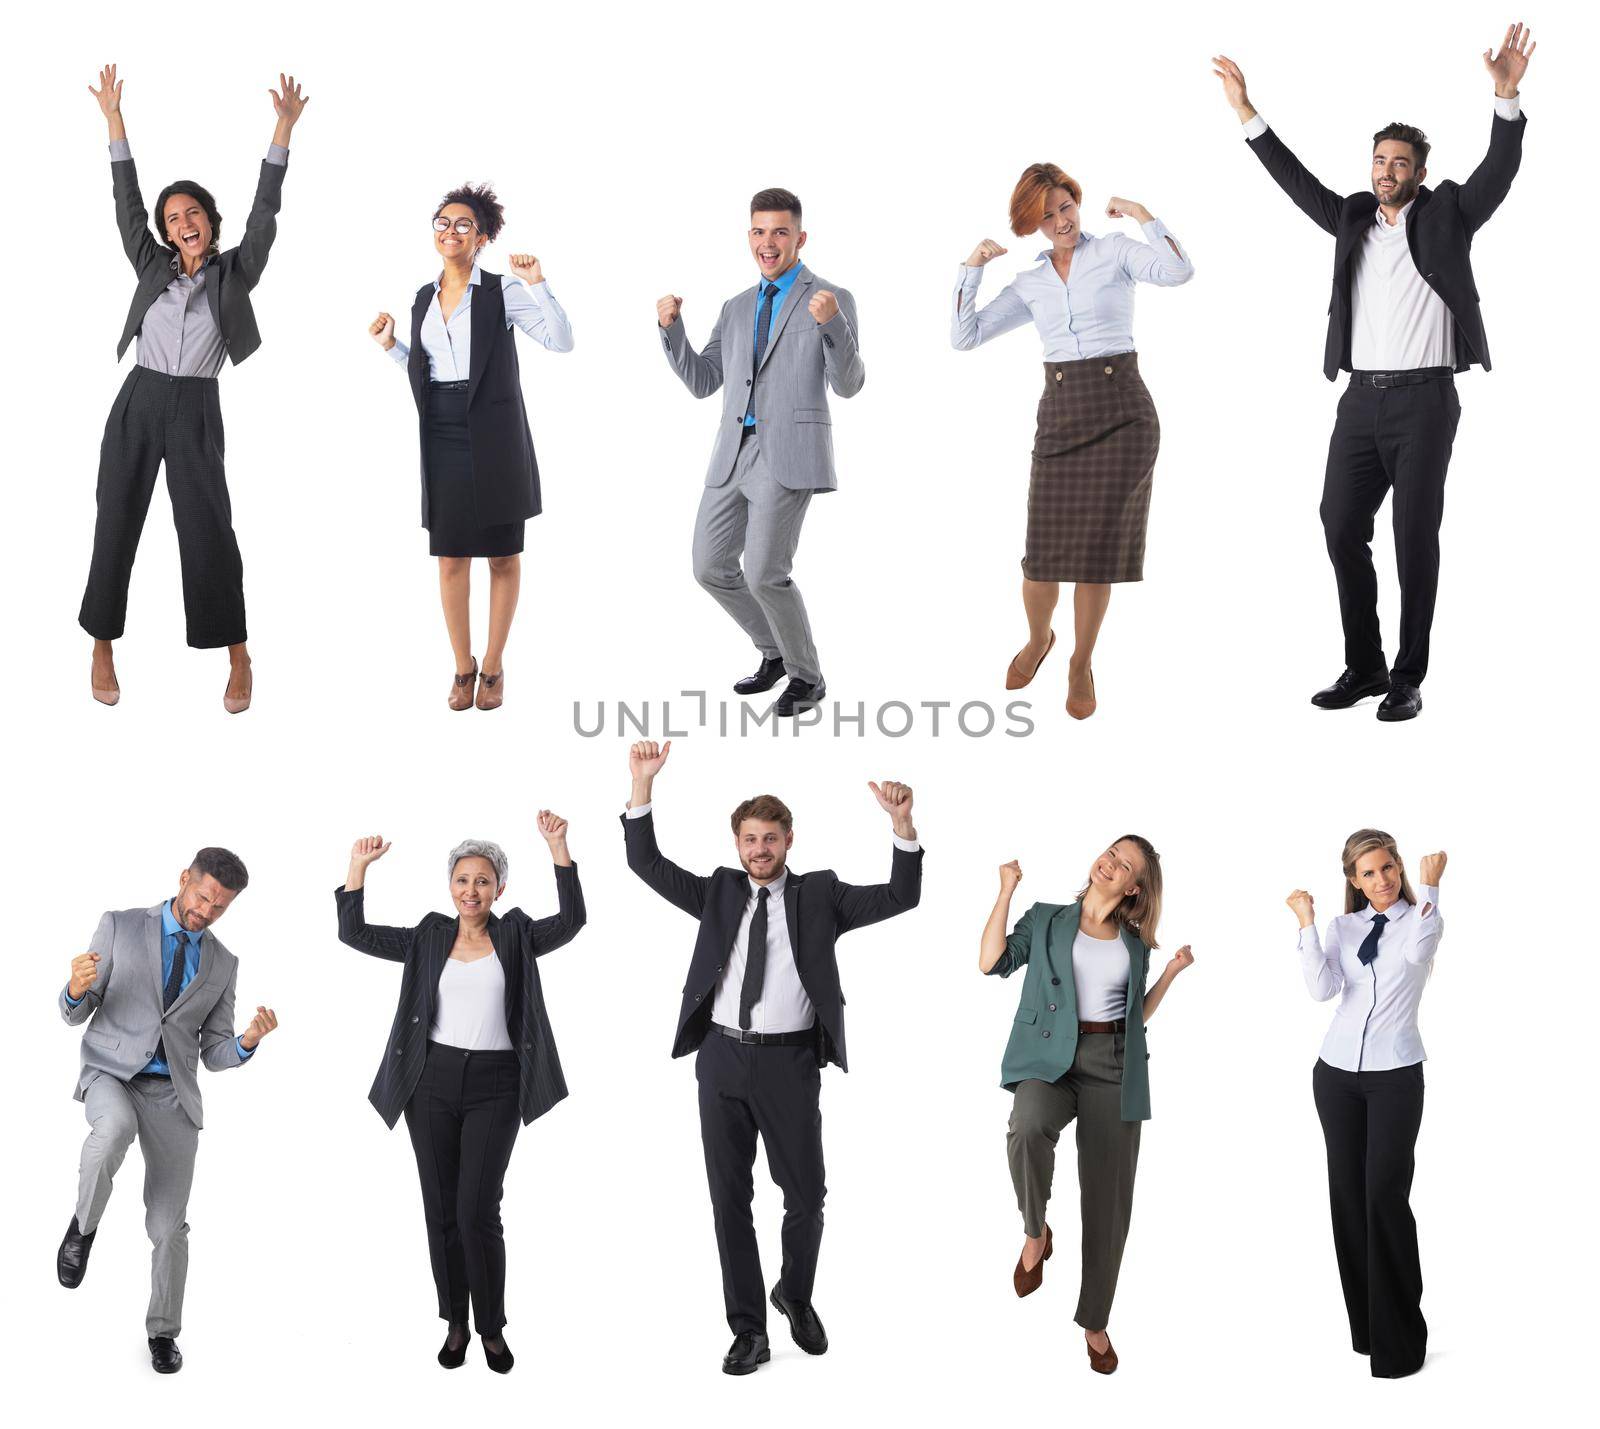 Business prople whith hands up cheering businesspeople set of full length portraits isolated on white background